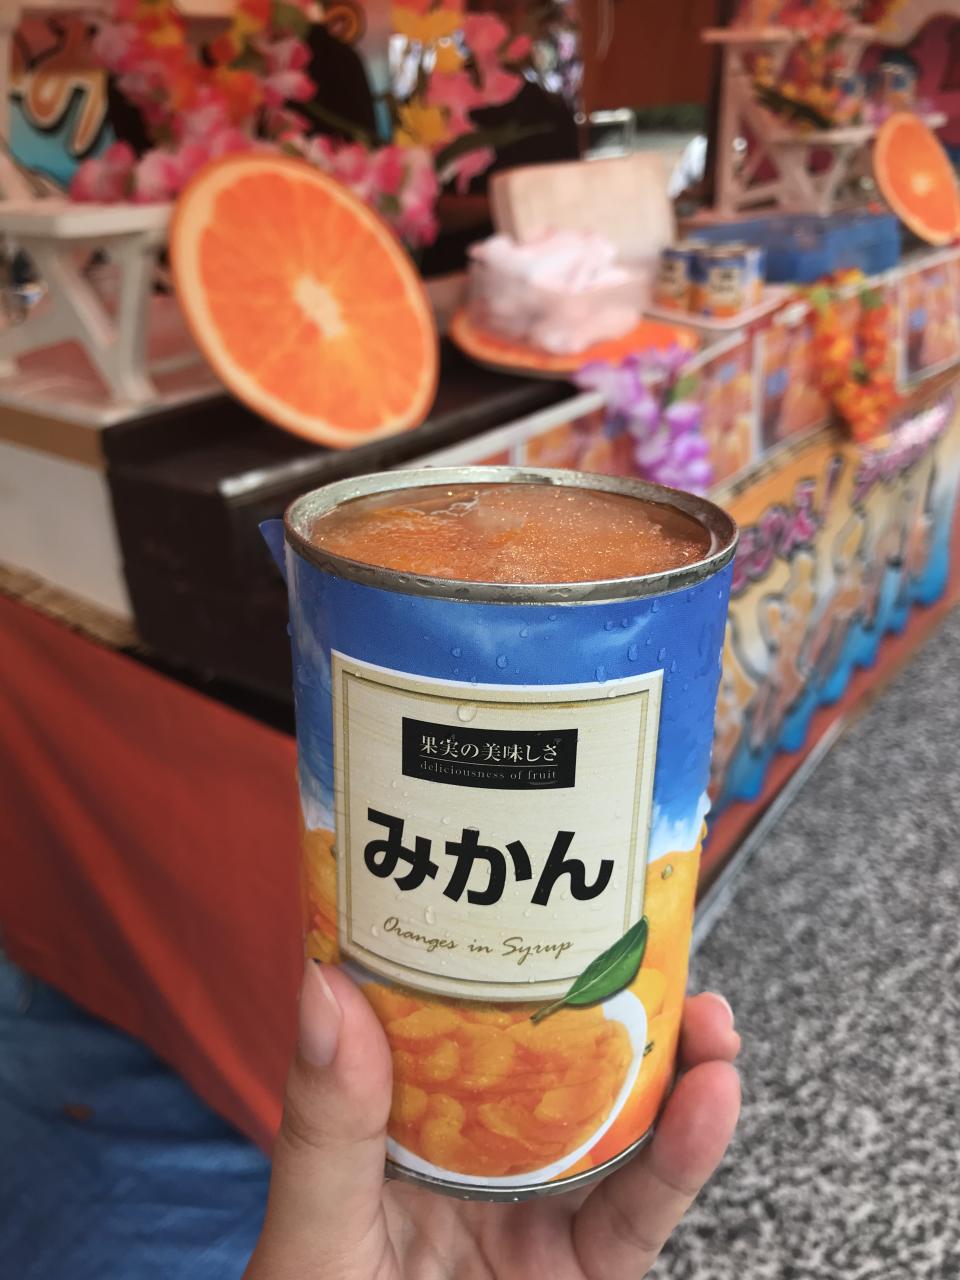 Frozen canned oranges sold at summer festival in Japan. (Photo: Lim Yian Lu)